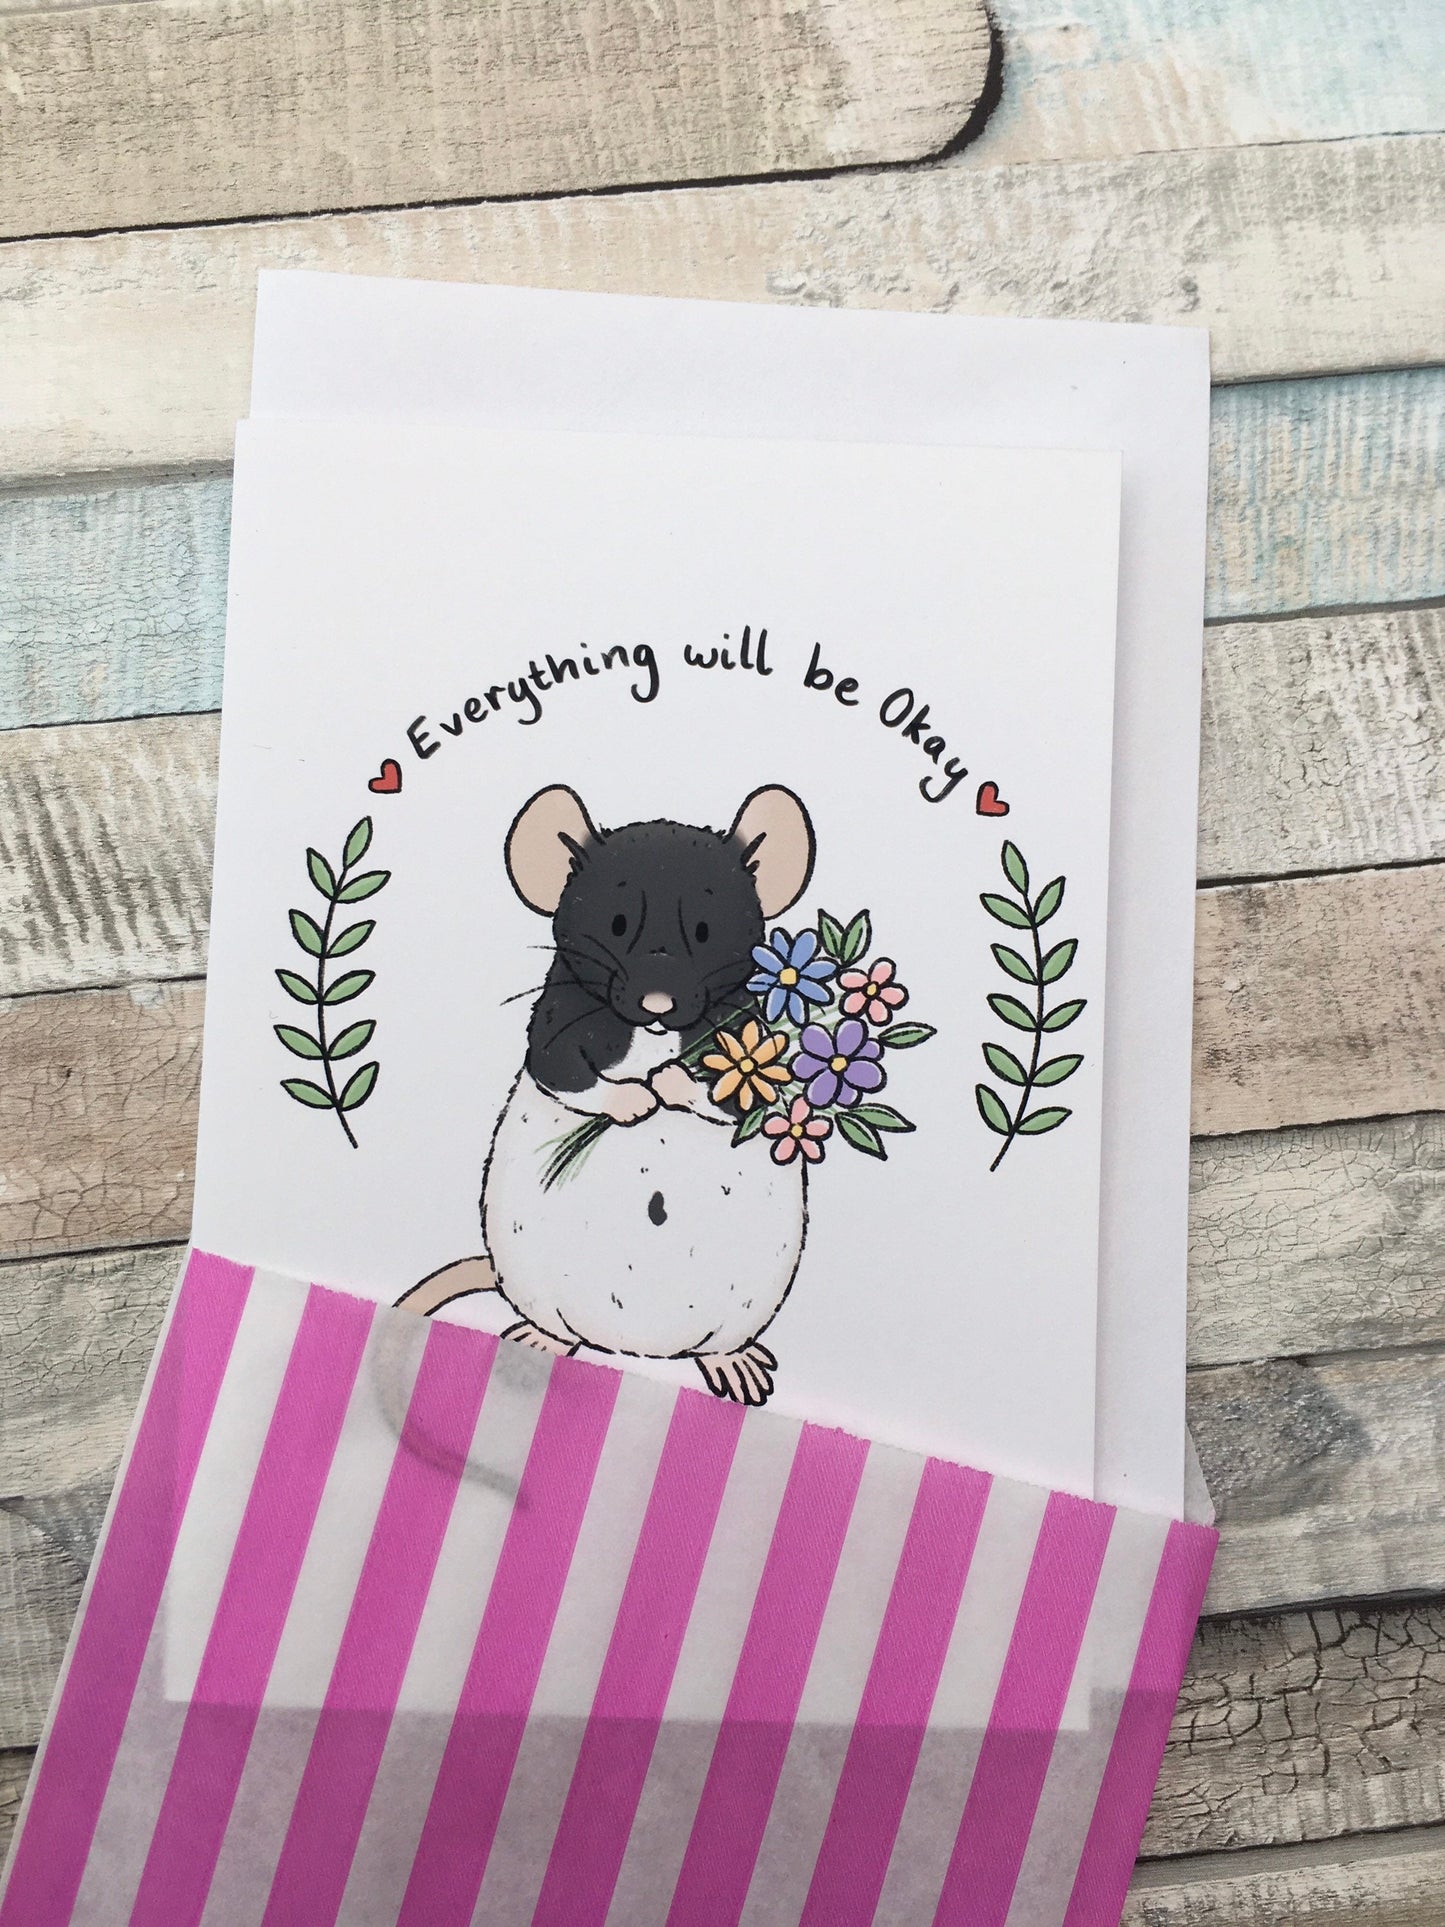 Everything Will Be Okay Cute Rat A6 Blank Greeting Card, Hooded Rat Illustration, Friendship Rat Lover Gift